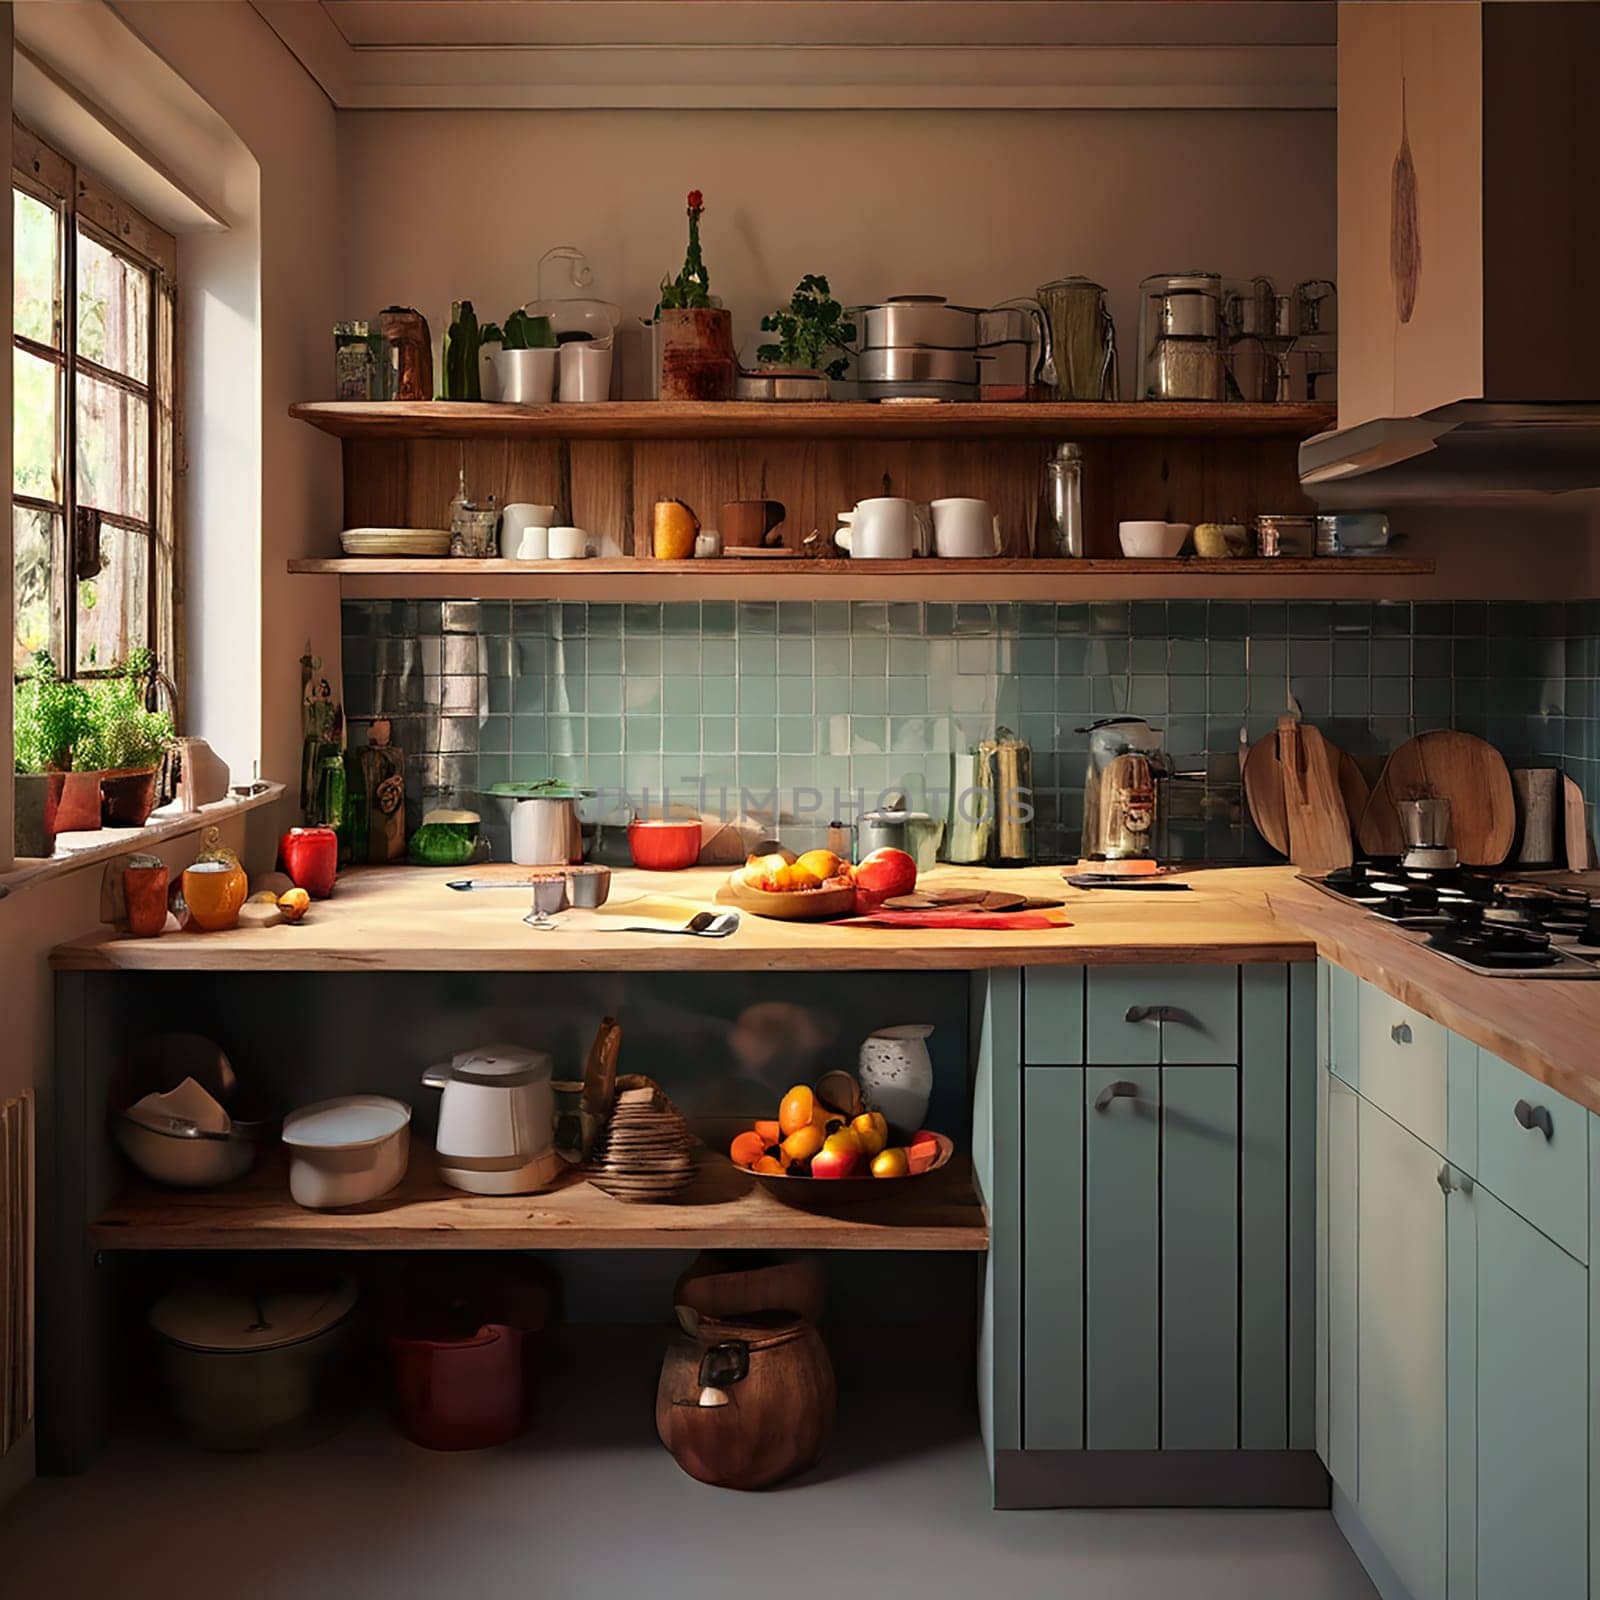 Designing a Family-Friendly Kitchen: Practicality with Style